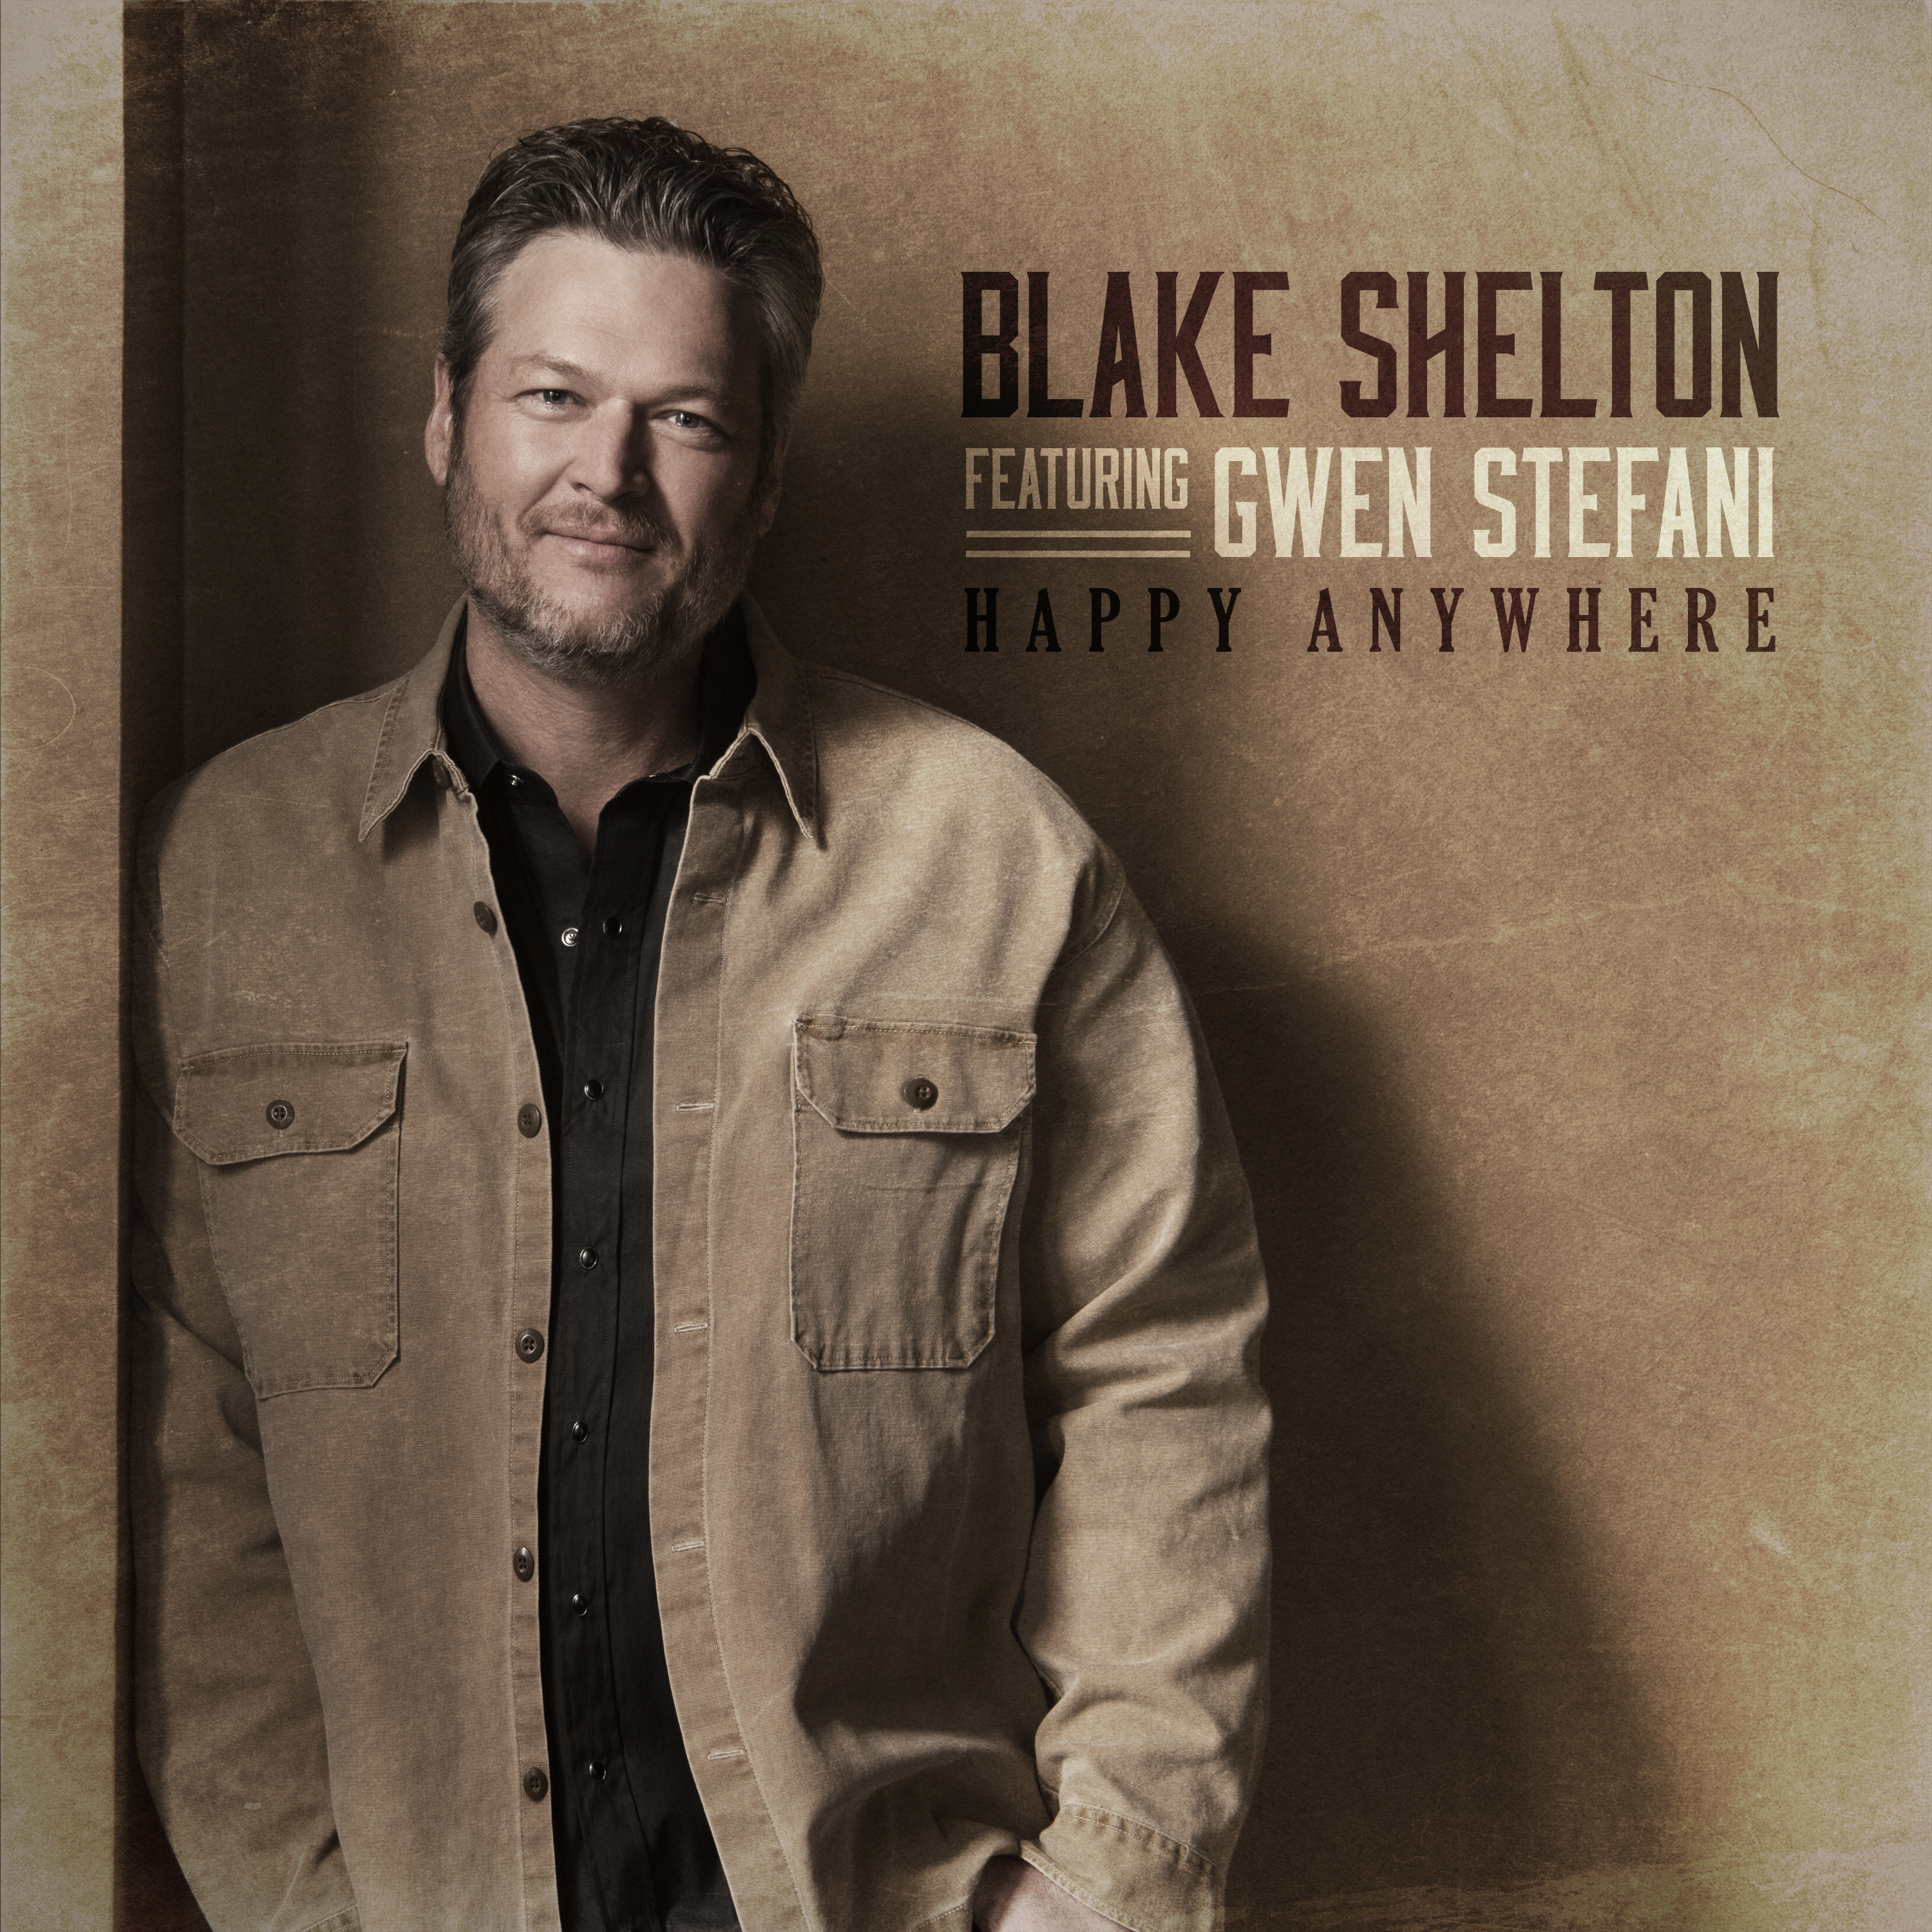 BLAKE SHELTON IS "HAPPY ANYWHERE" IN NEW SINGLE FEATURING GWEN STEFANI, AVAILABLE THIS FRIDAY (7/24)